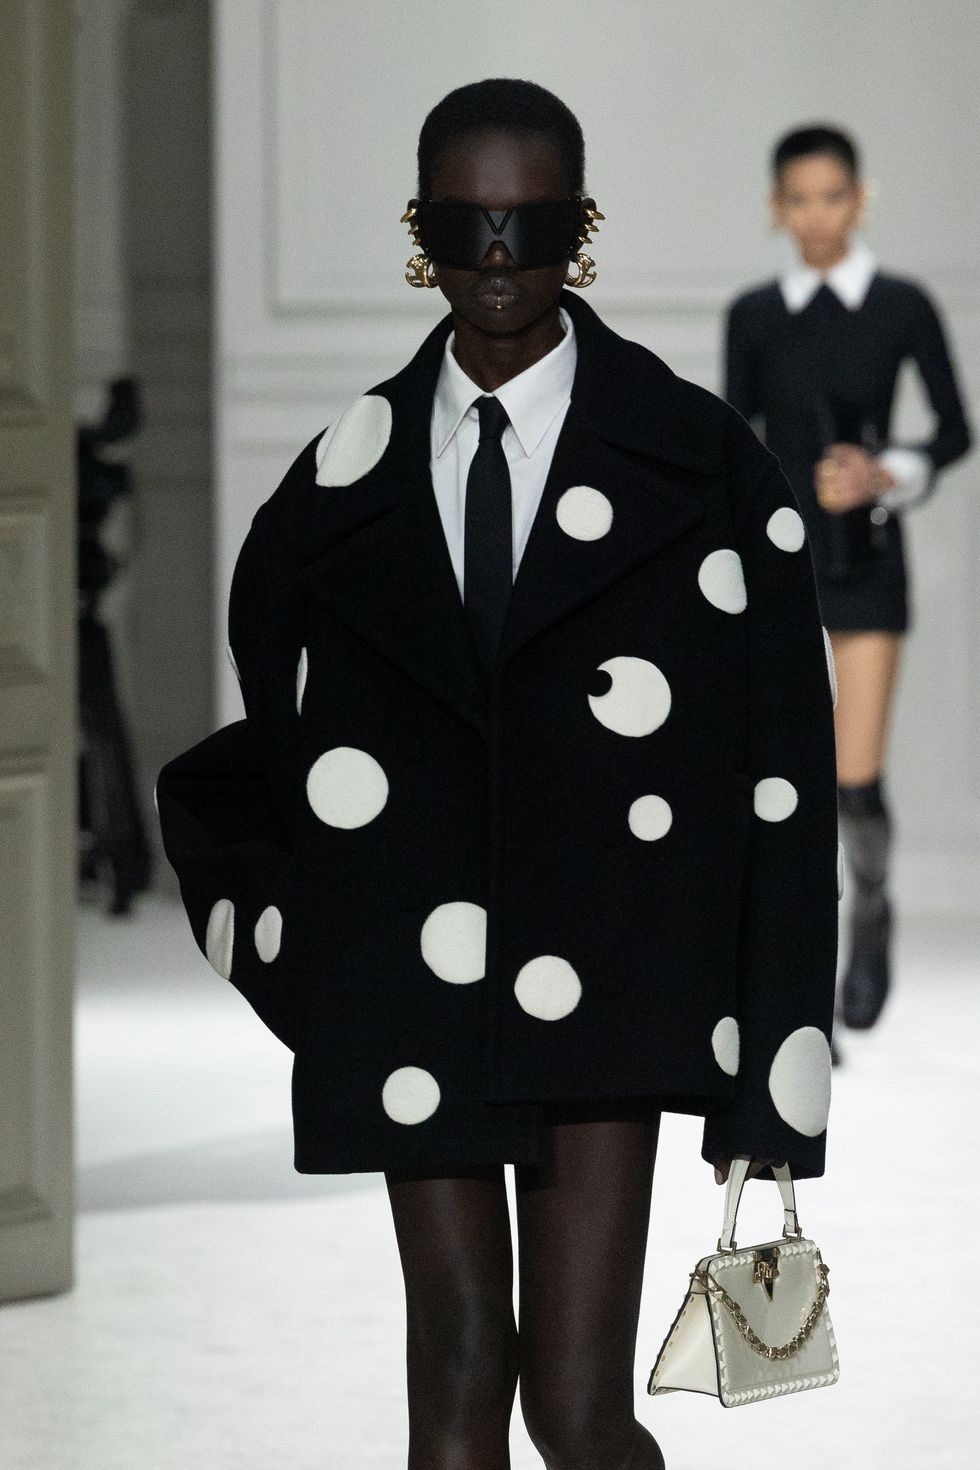 paris, france march 05 editorial use only for non editorial use please seek approval from fashion house a model walks the runway during the valentino womenswear fall winter 2023 2024 show as part of paris fashion week on march 05, 2023 in paris, france photo by marc piaseckiwireimage